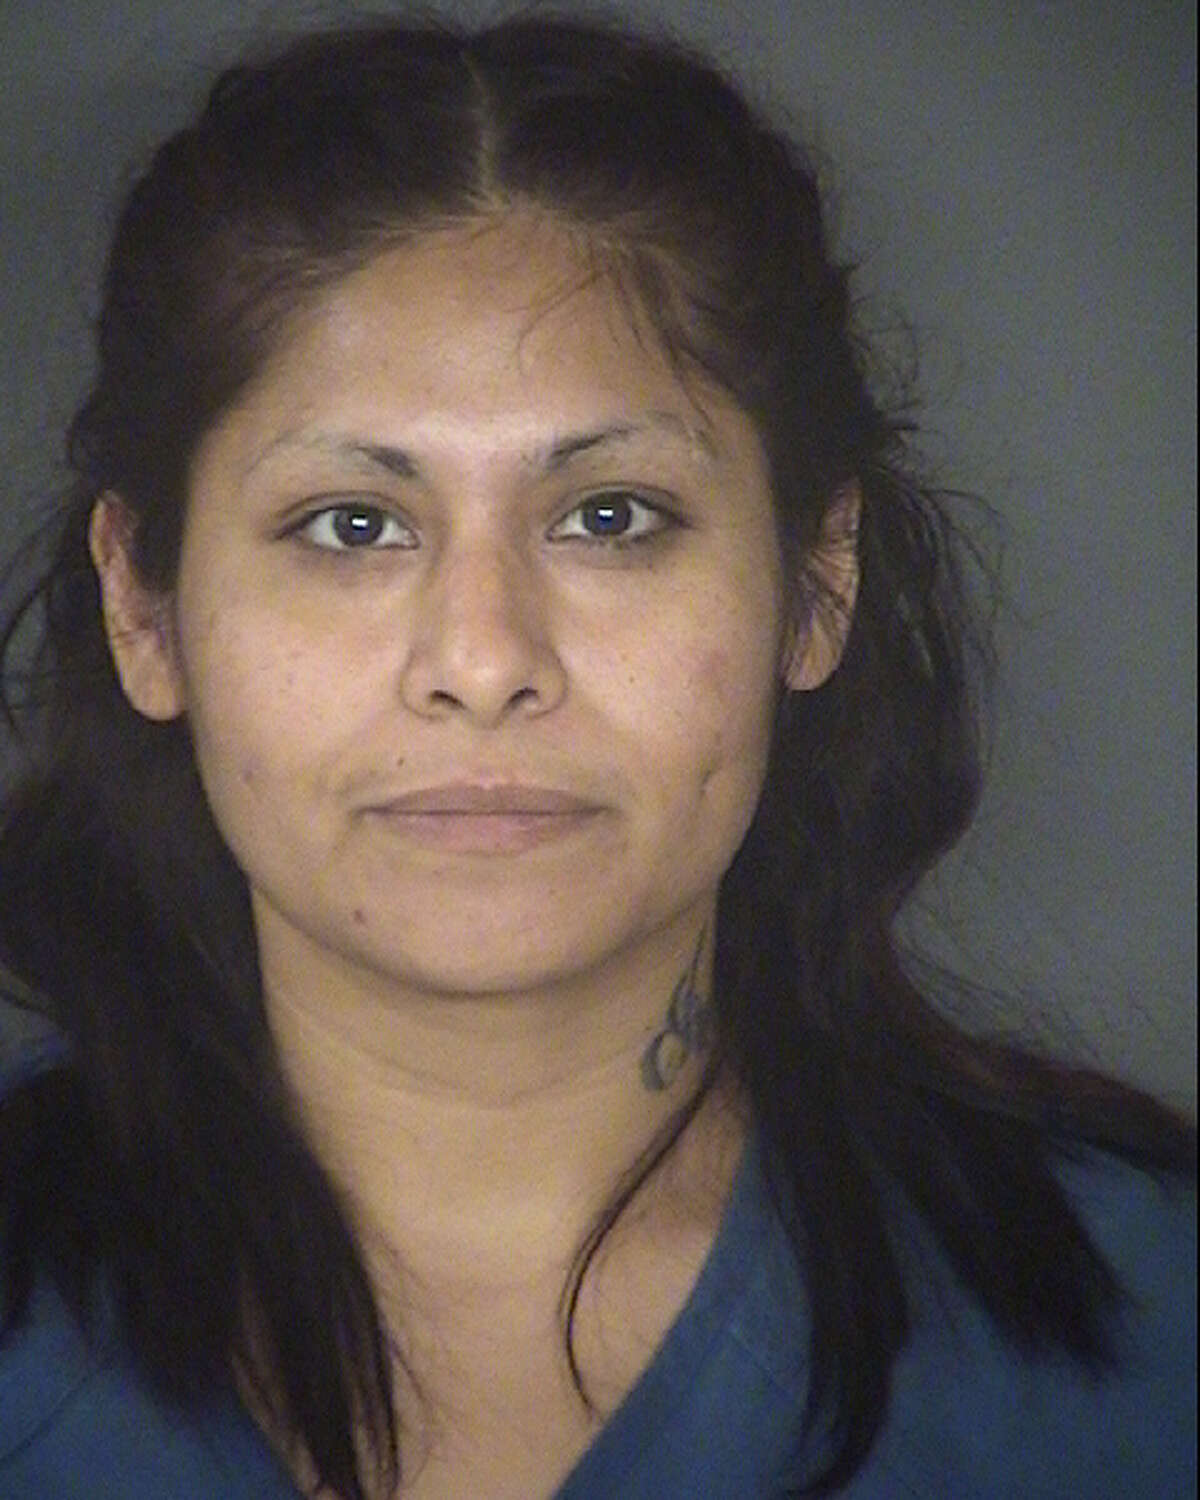 Jacqueline Flores Alonzo, 28, is accused of sexual assault of a child.